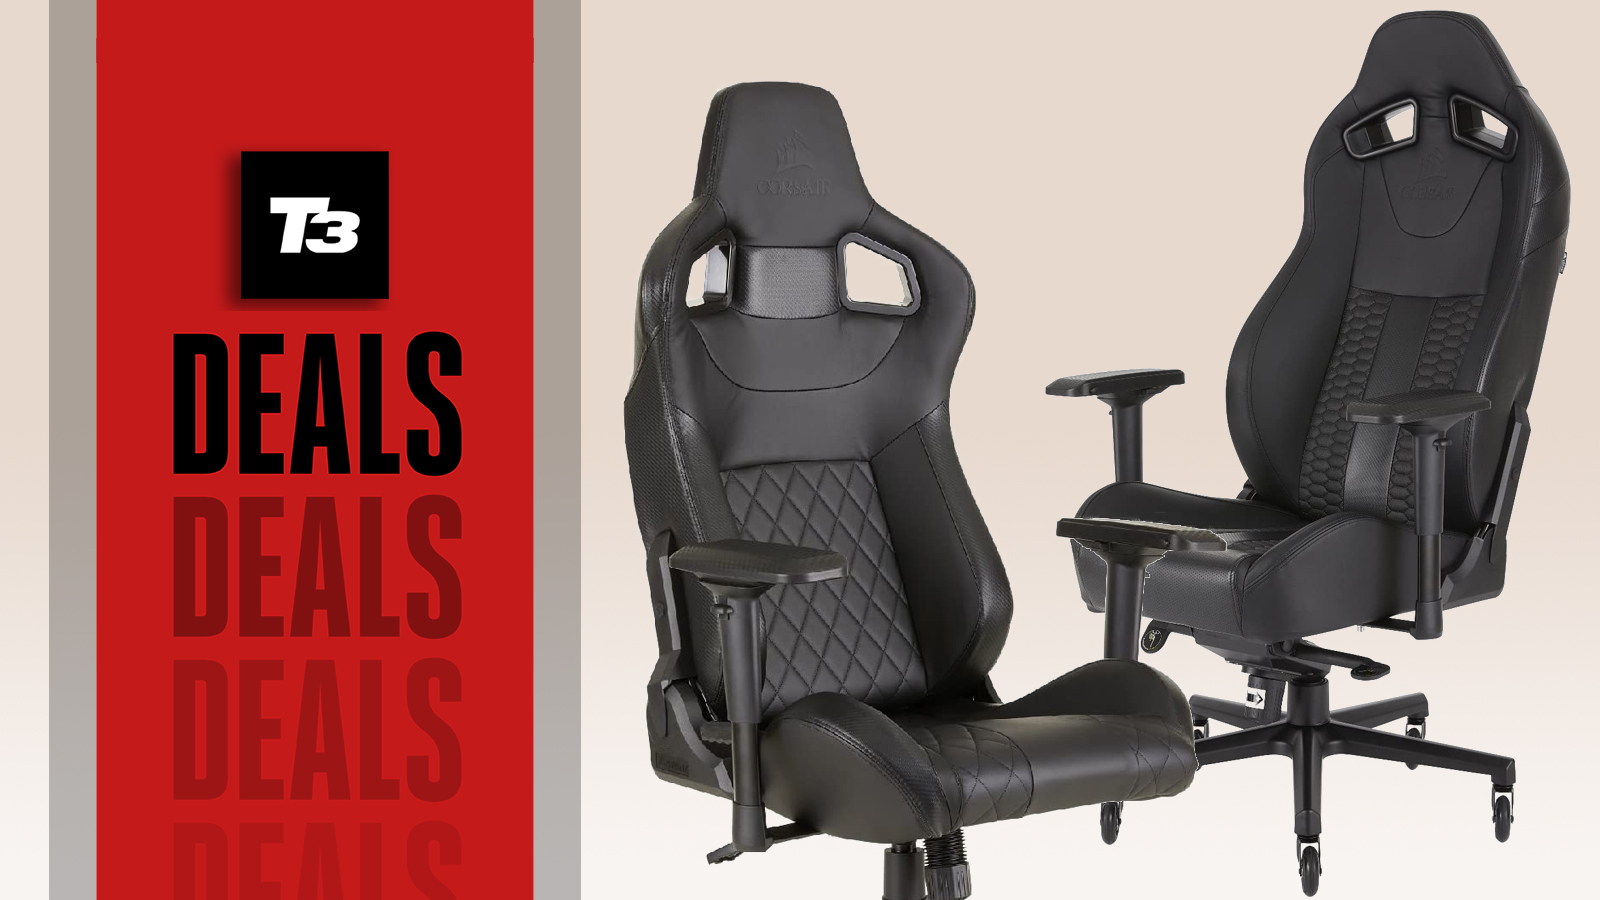 Cheap Gaming Chair Deals Up To 100 Off Select Corsair Gaming Chairs At Amazon T3